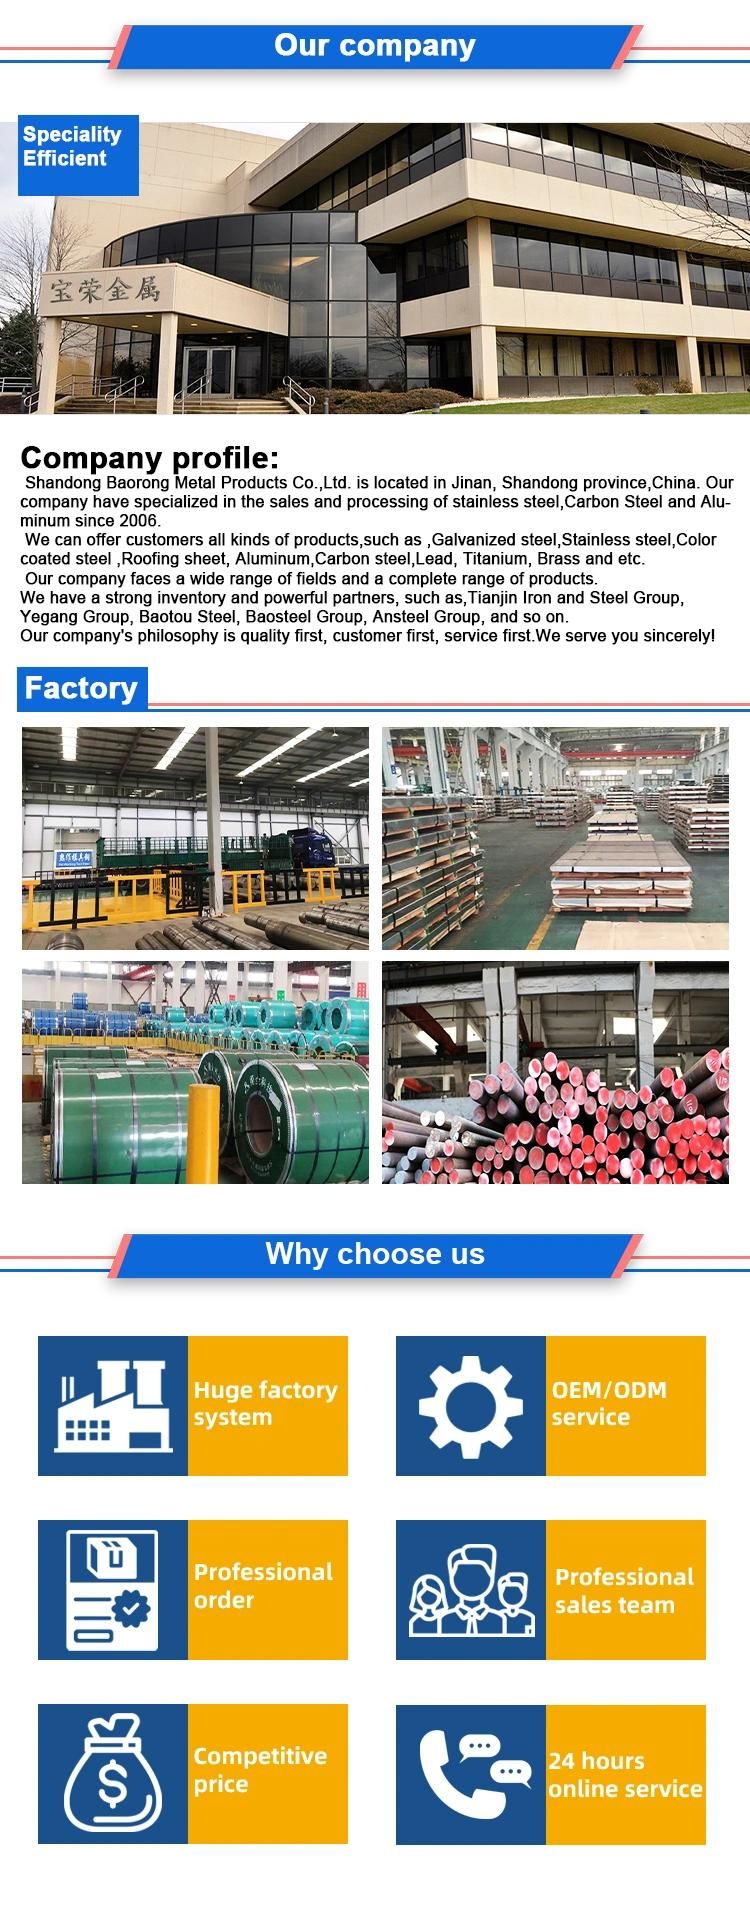 China Manufacturer High Quality Color Coated Galvanized Steel Sheet in Coil/PPGI Gi